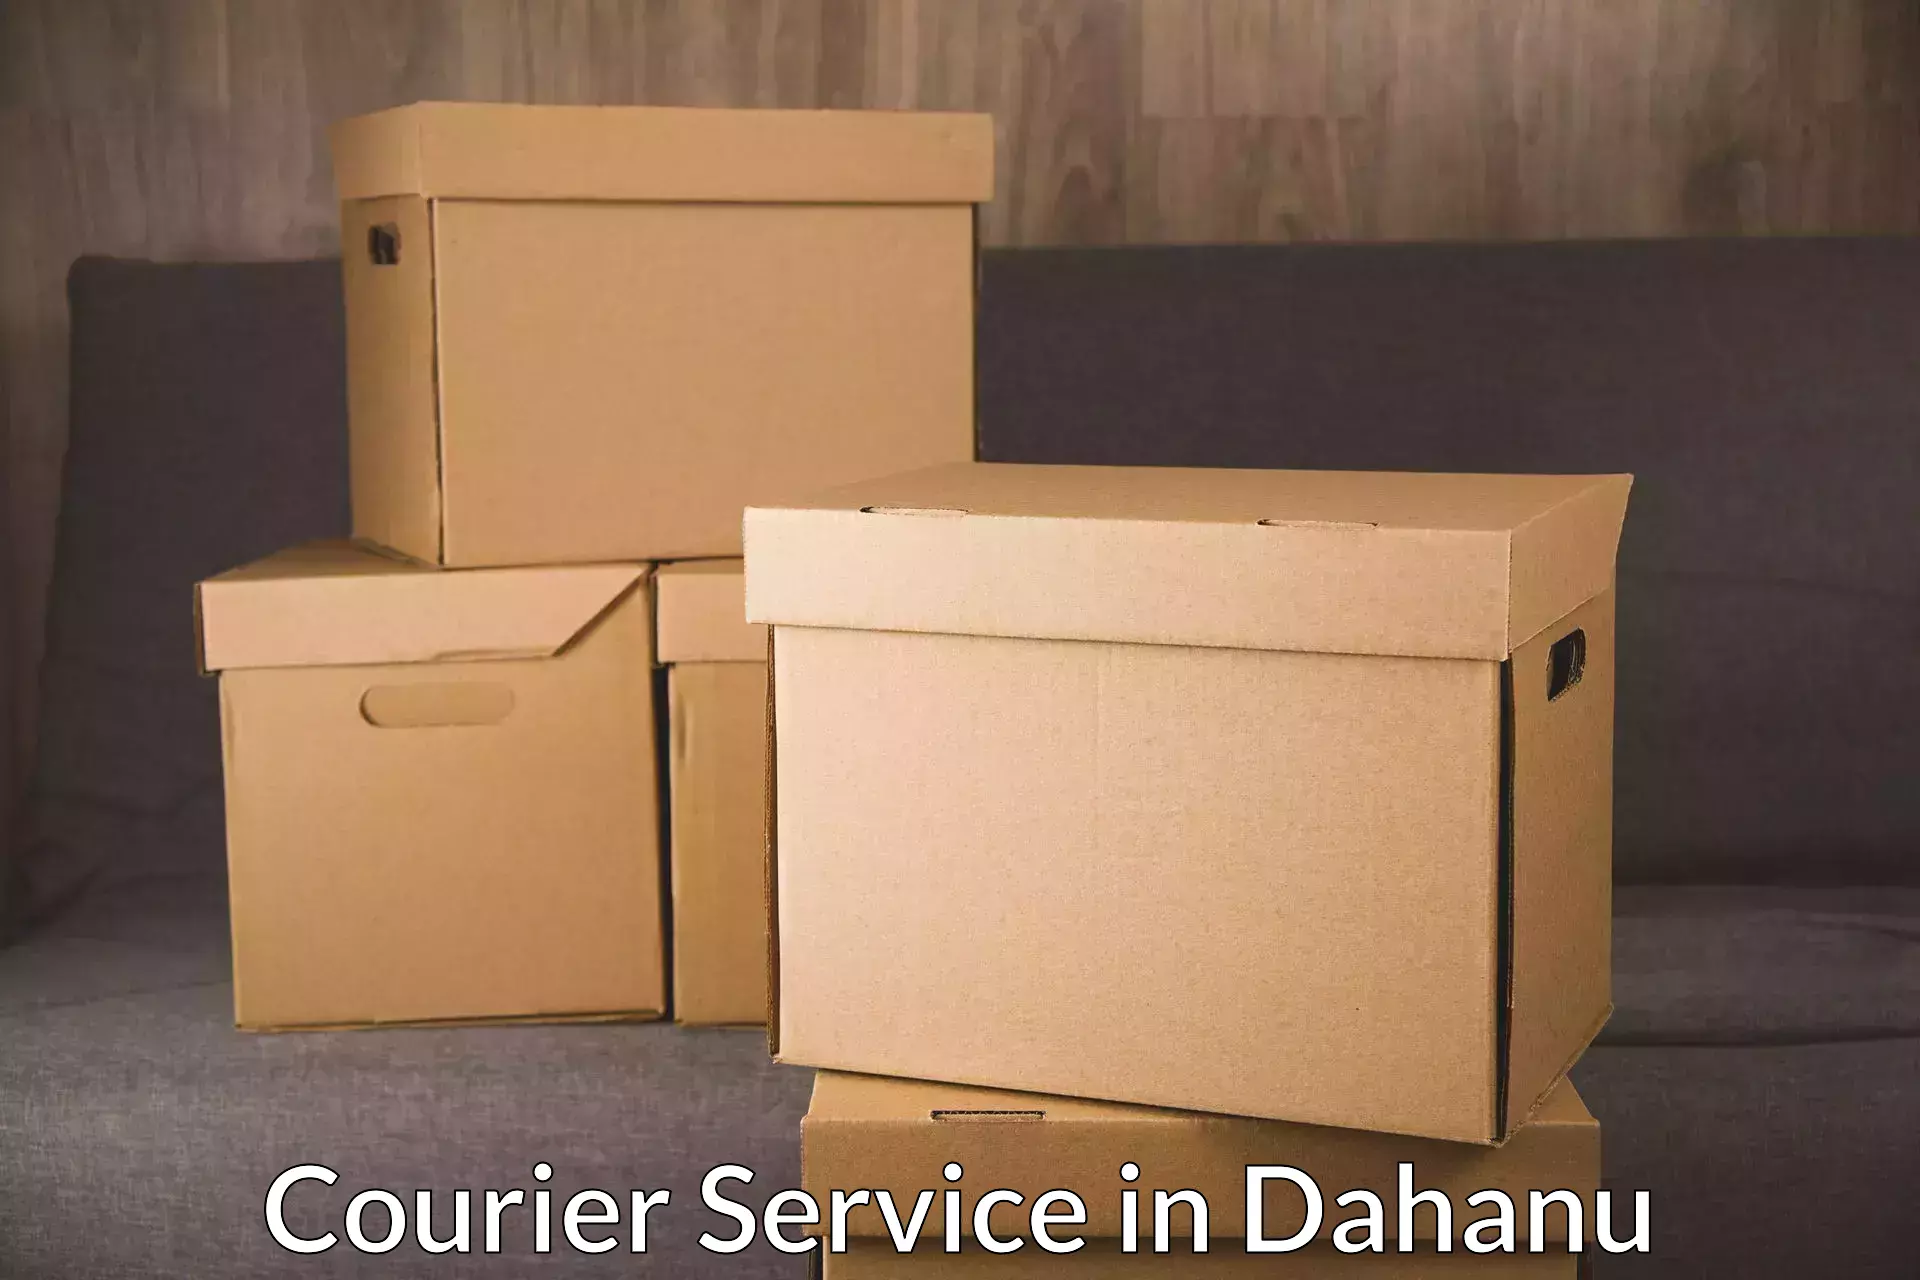 Nationwide courier service in Dahanu